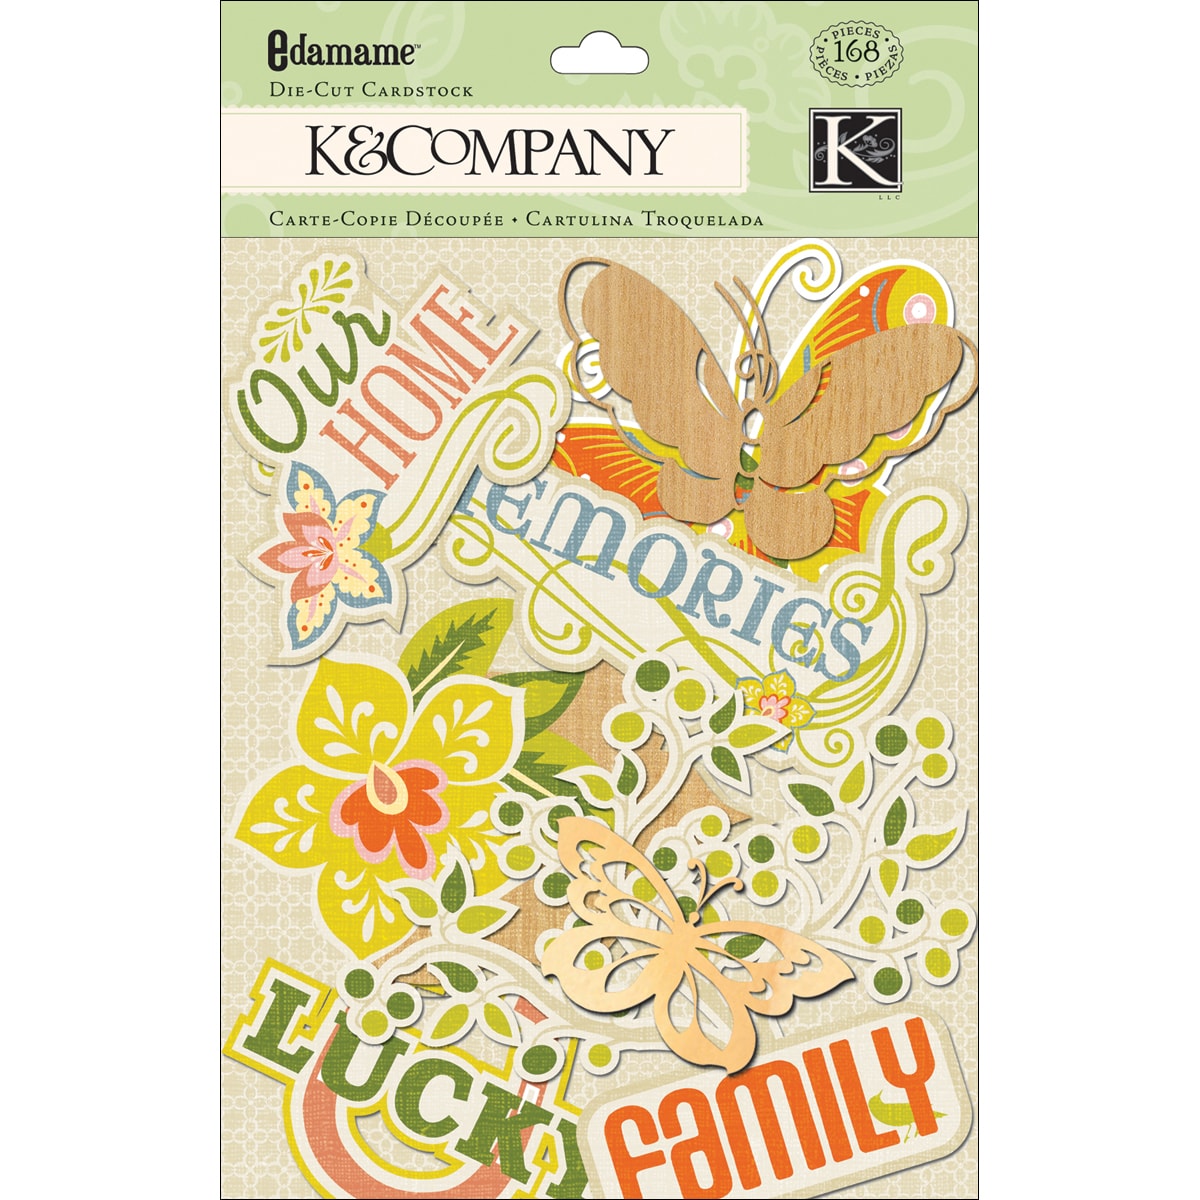 Company Edamame Words and Icons Cardstock Die Cuts